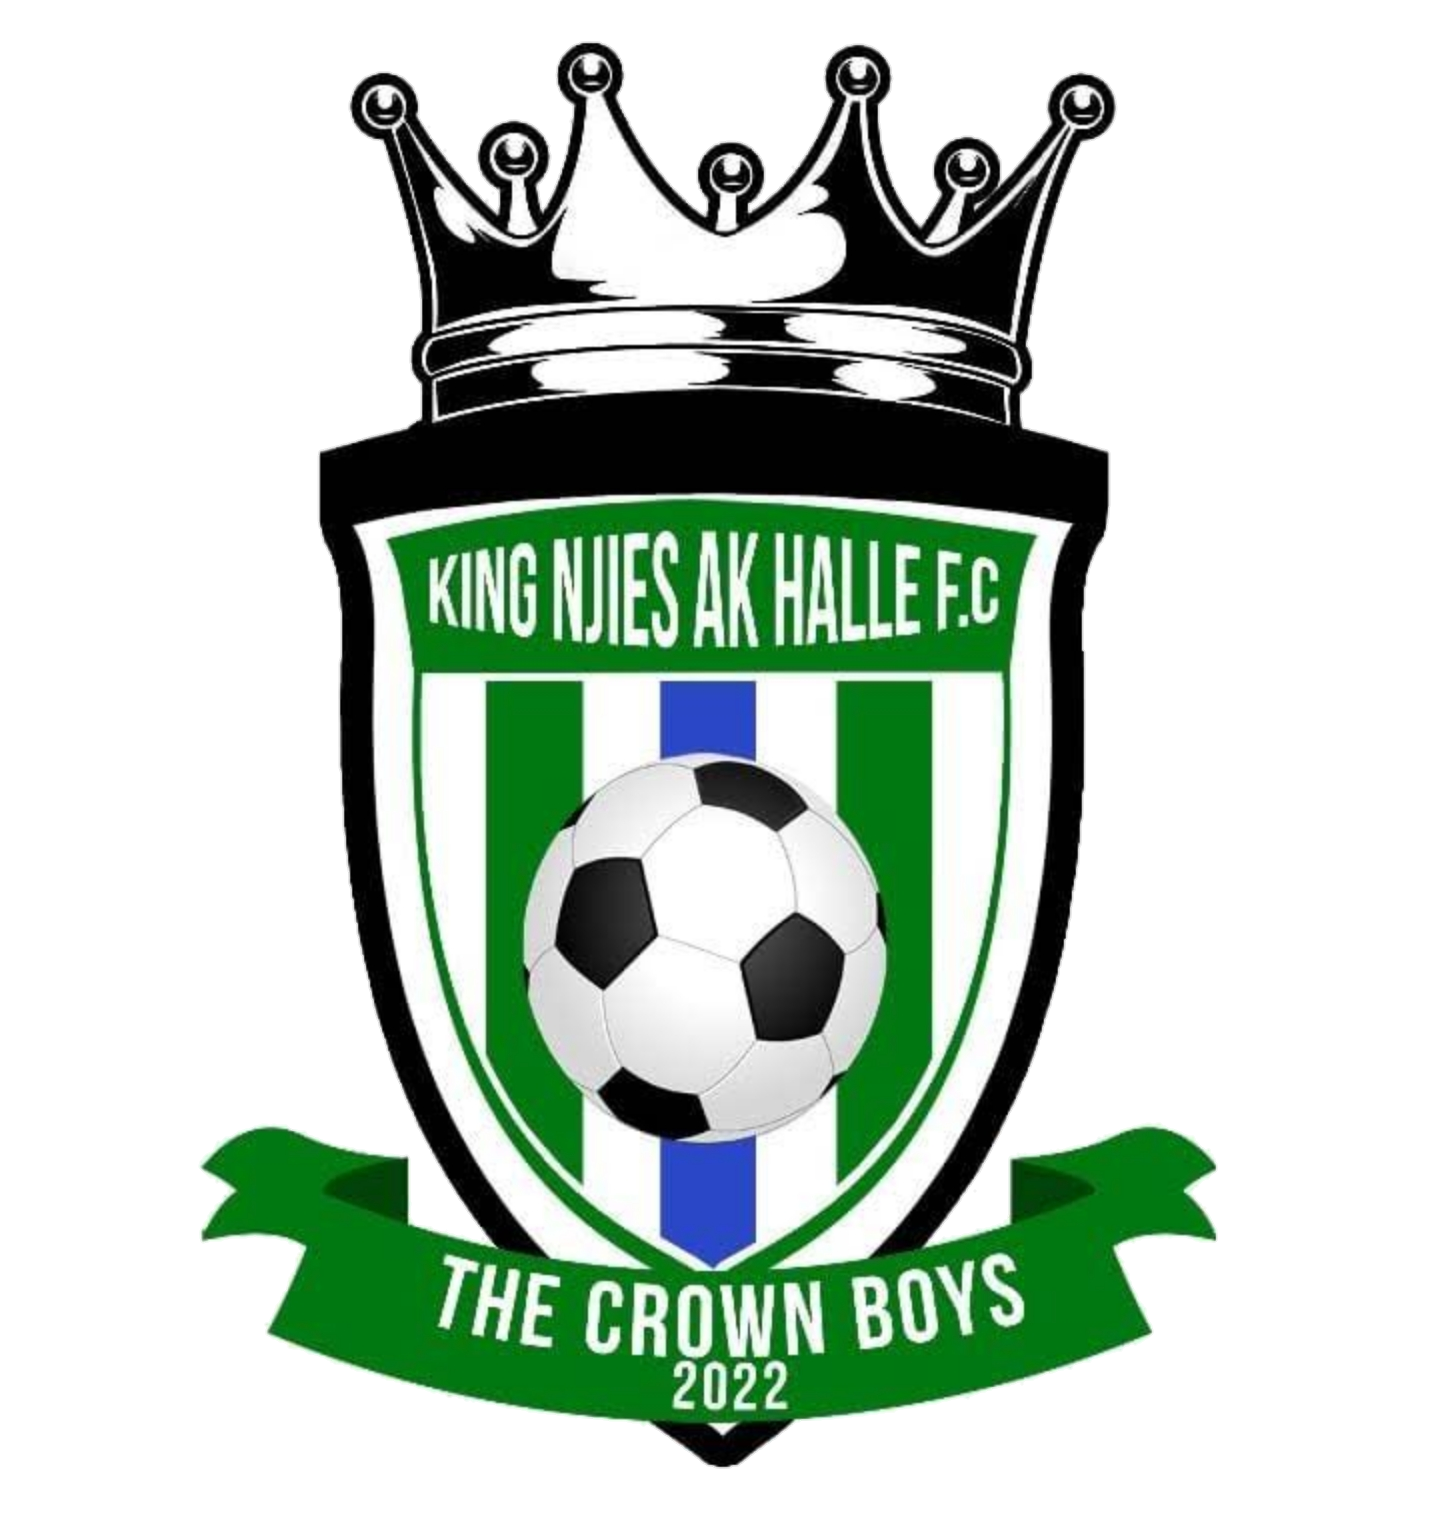 Wappen King Njies ak Halle FC